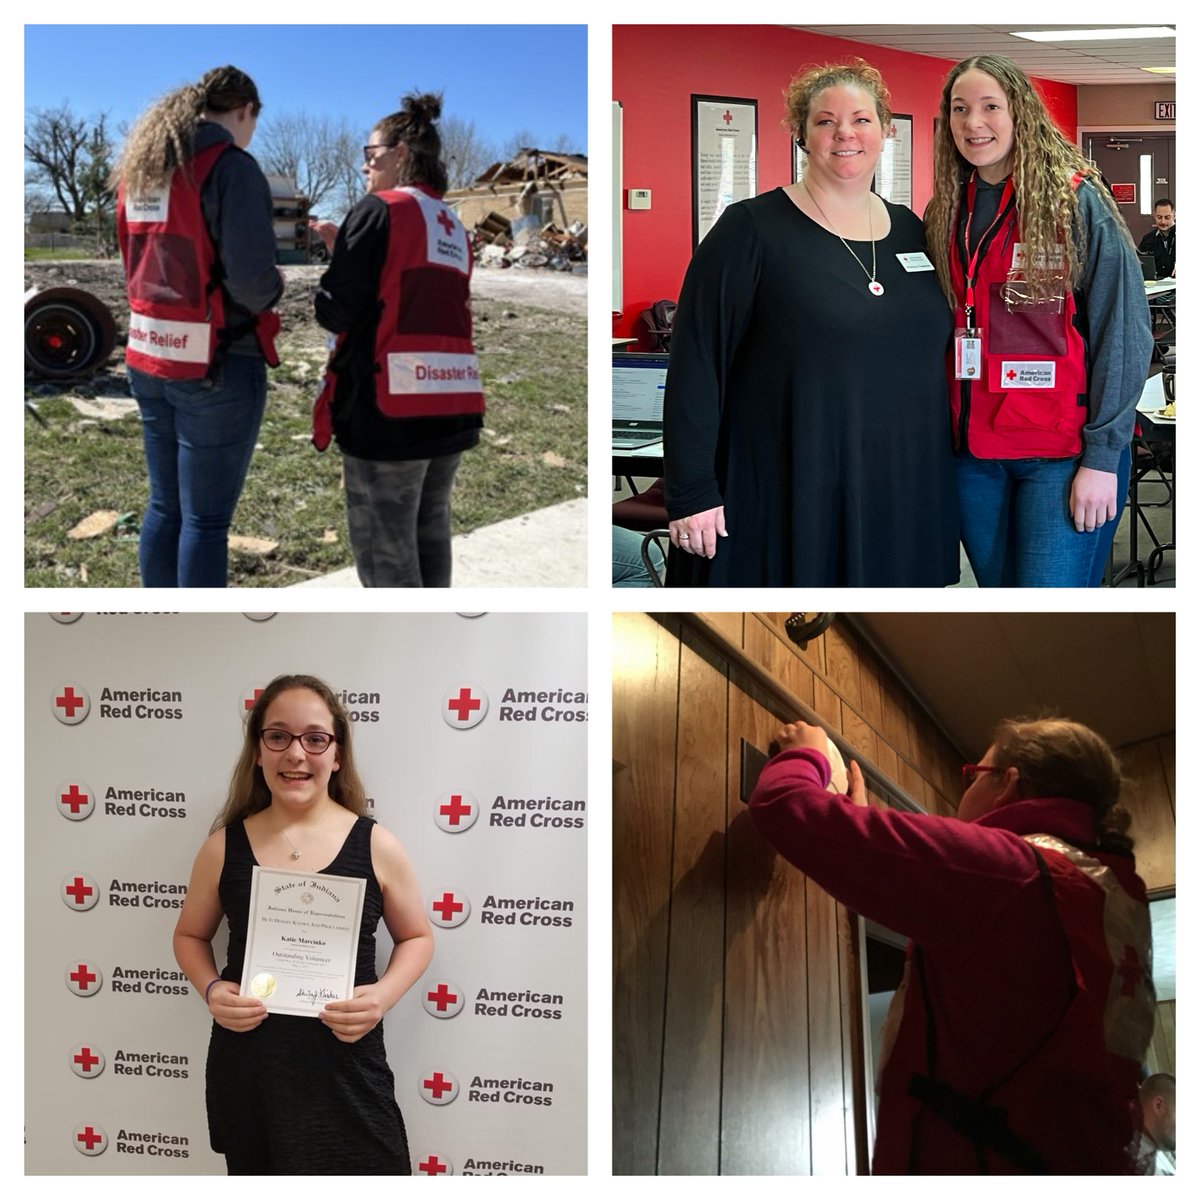 From an early age, Katie has been committed to volunteer work with the #RedCross, making a positive difference in her community and beyond. Now a graduating senior, she's logged over 4,000 volunteer hours! Read more about her journey as a volunteer▶️ rdcrss.org/4aXKyMC